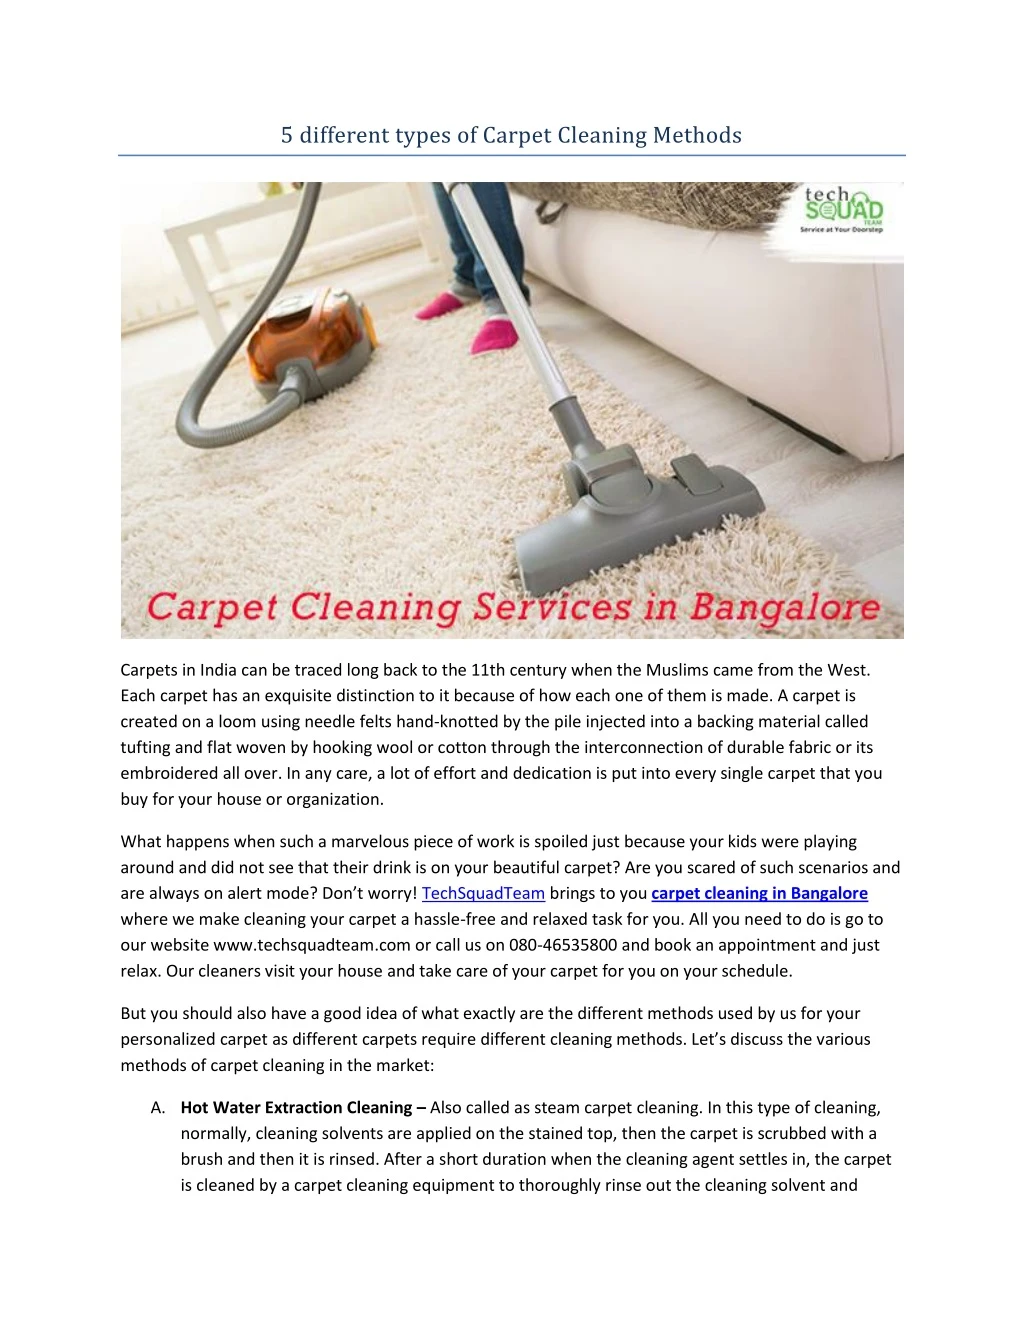 5 different types of carpet cleaning methods